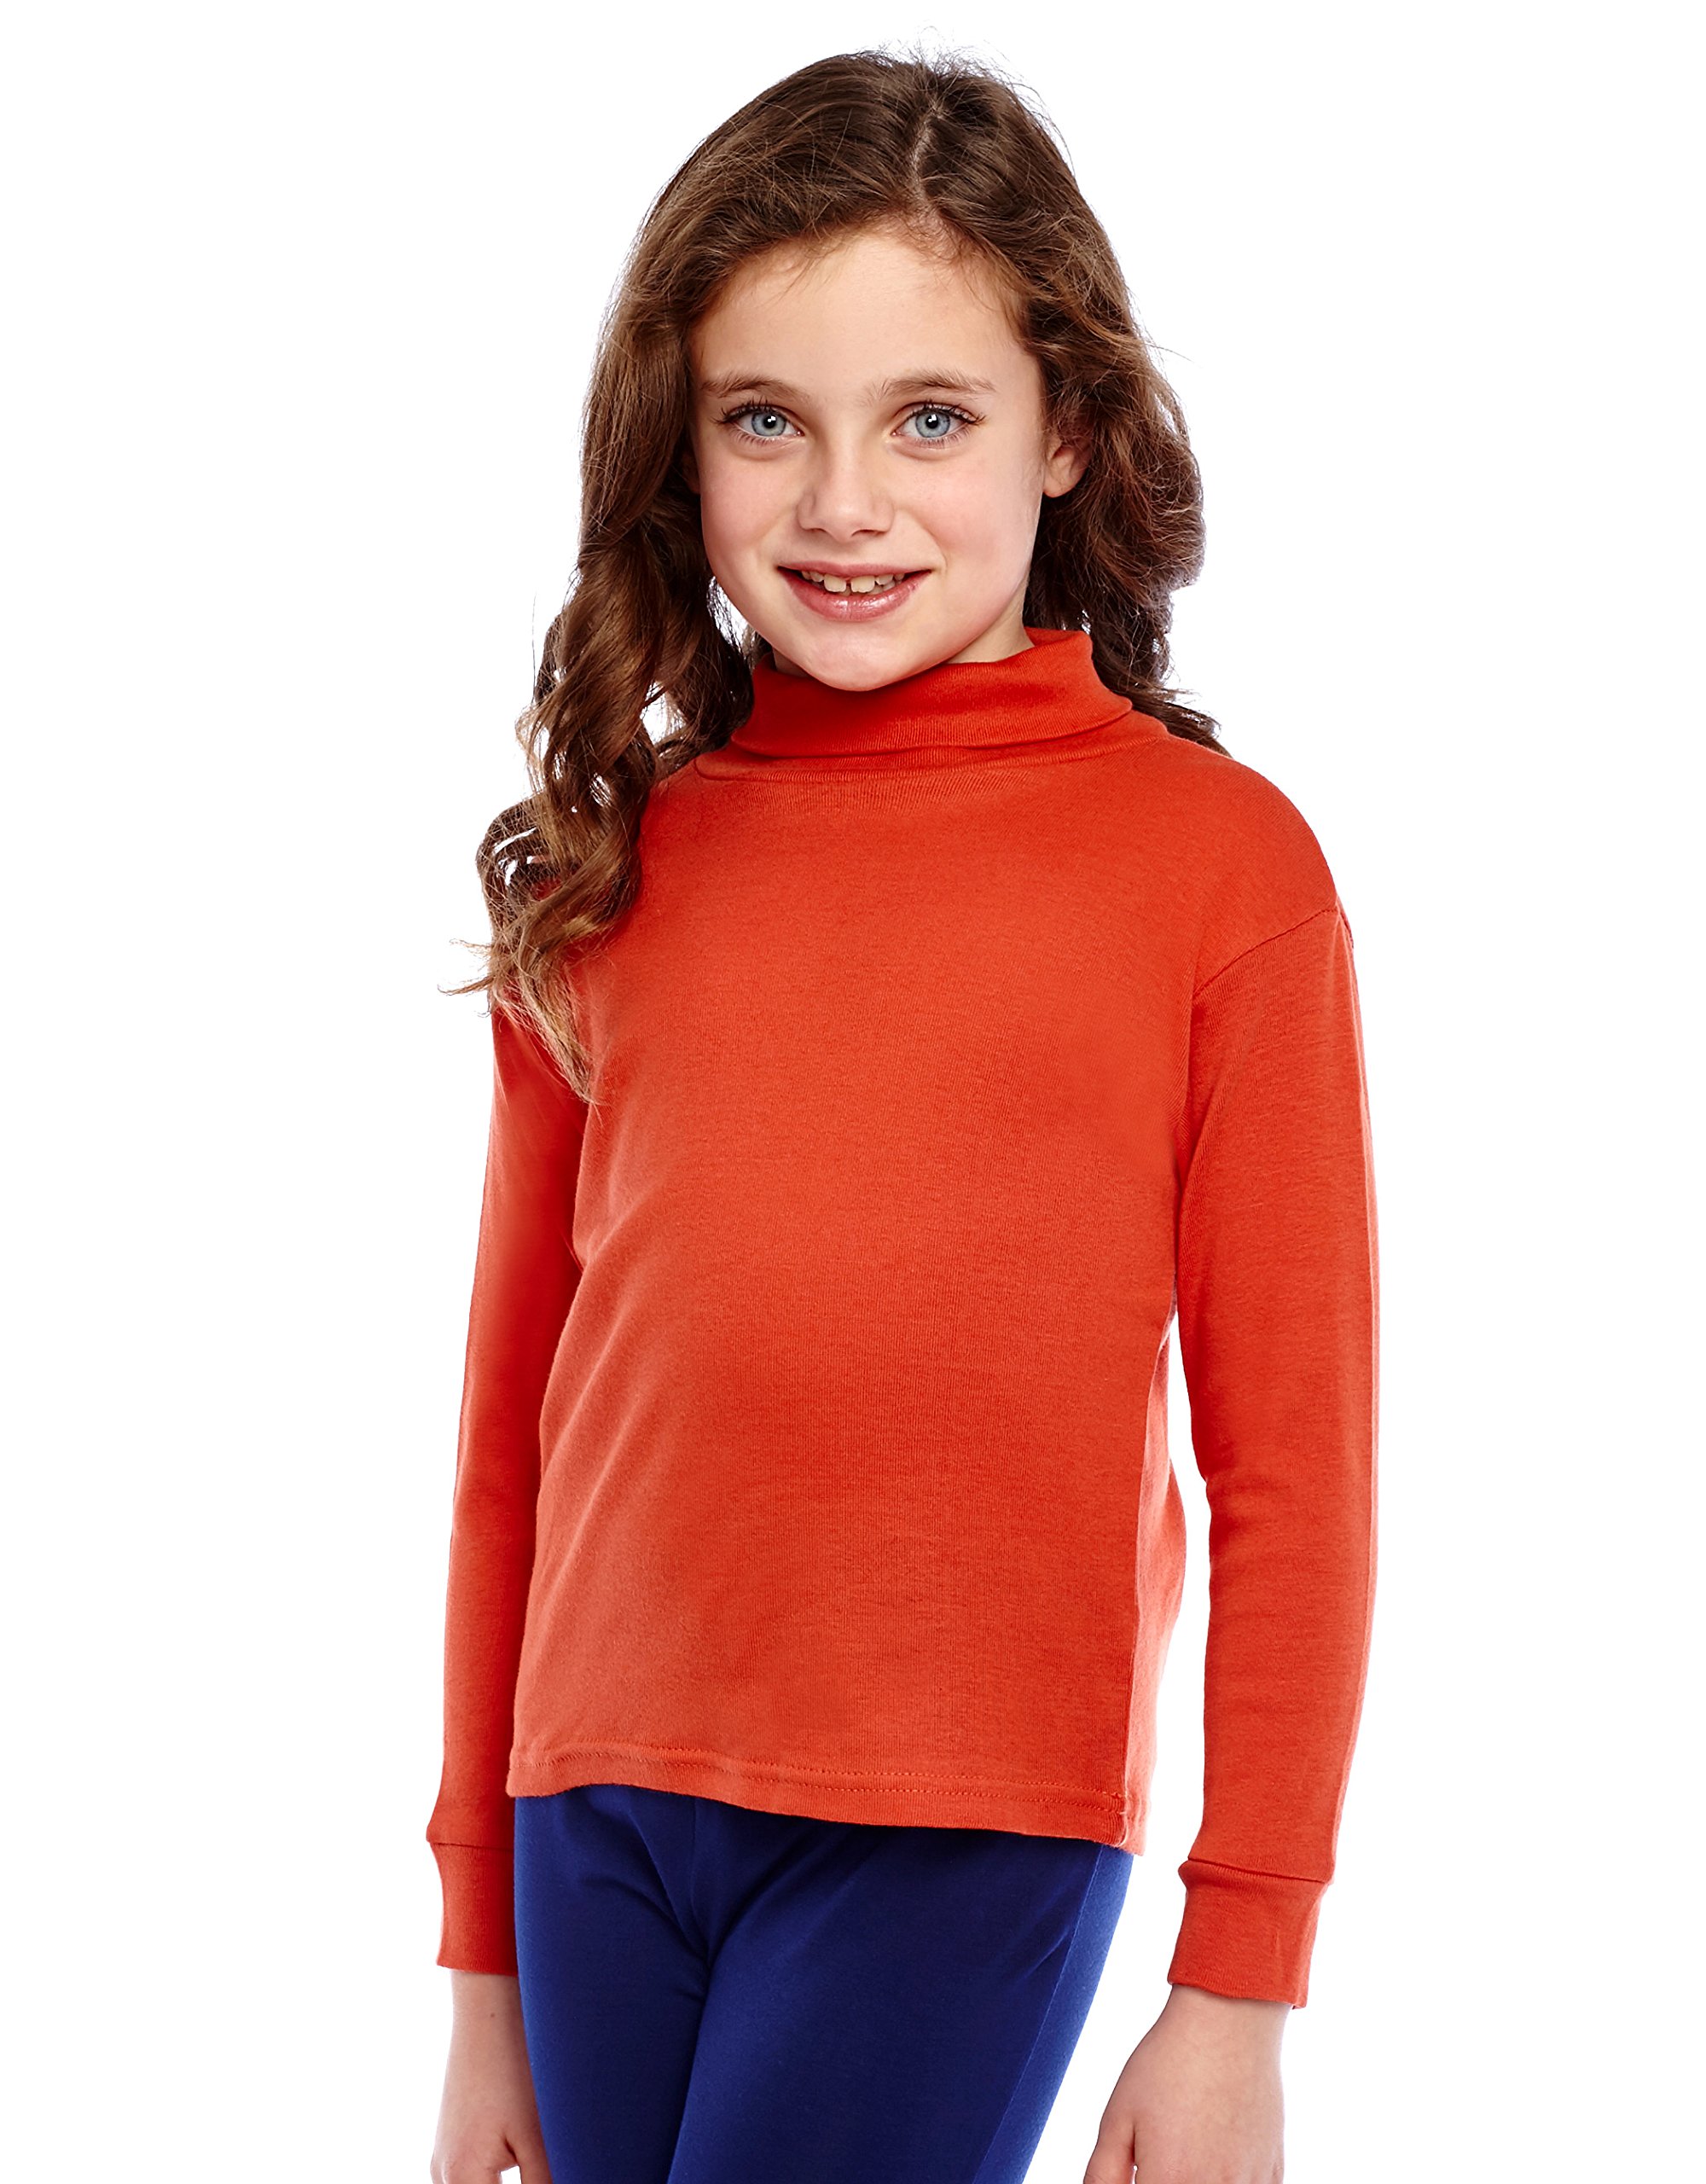 Leveret Girls Boys & Toddler Solid Turtleneck 100% Cotton Kids Shirt (2 Toddler-14 Years) Variety of Colors